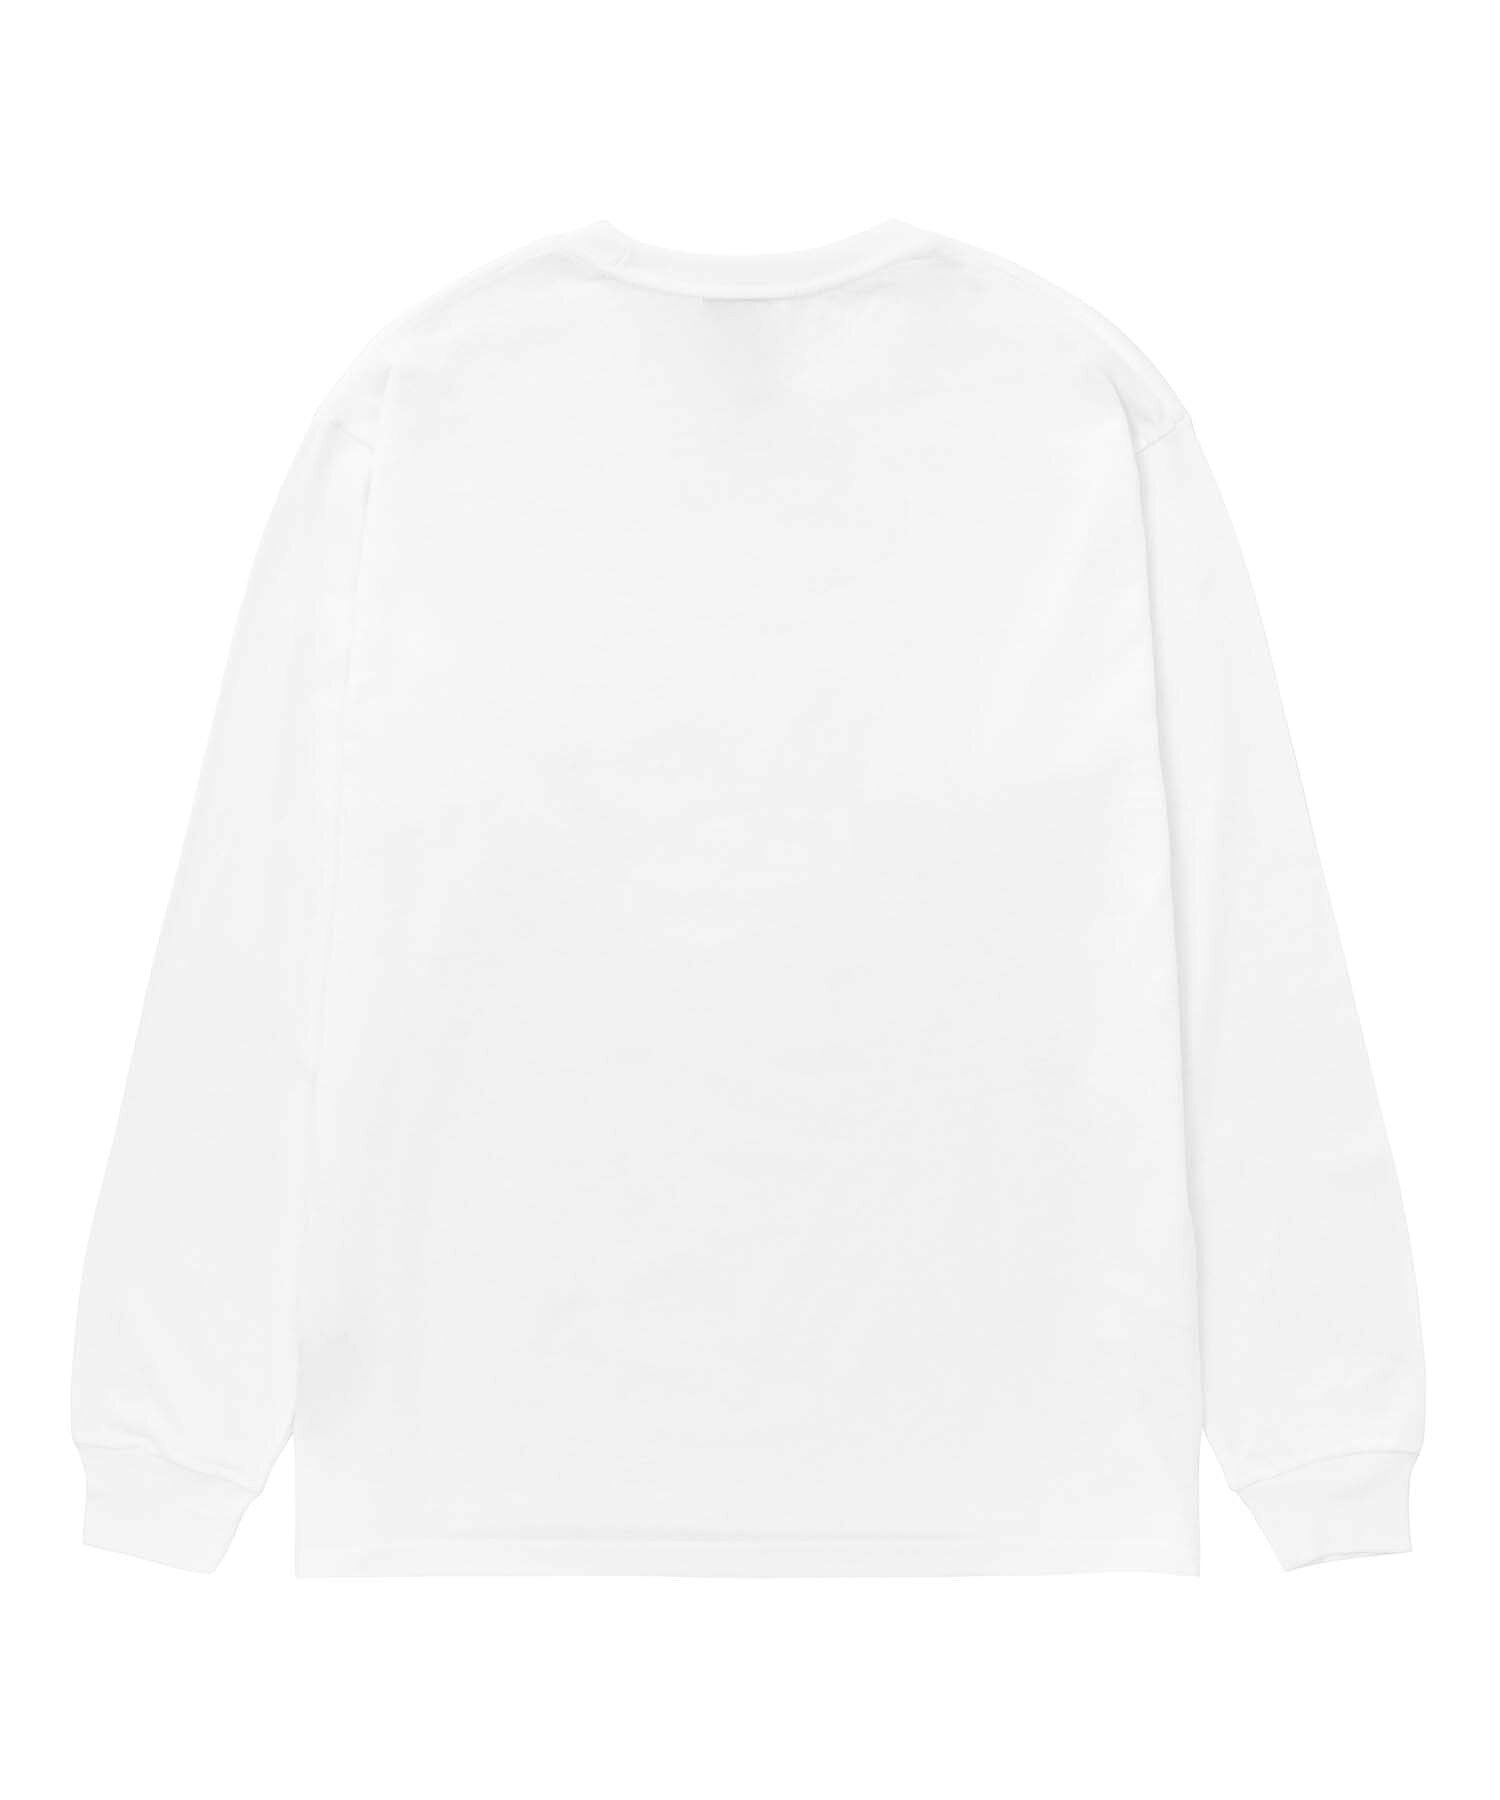 JAZZY GROOVES L/S EMB TEE HUF ハフ ロンT